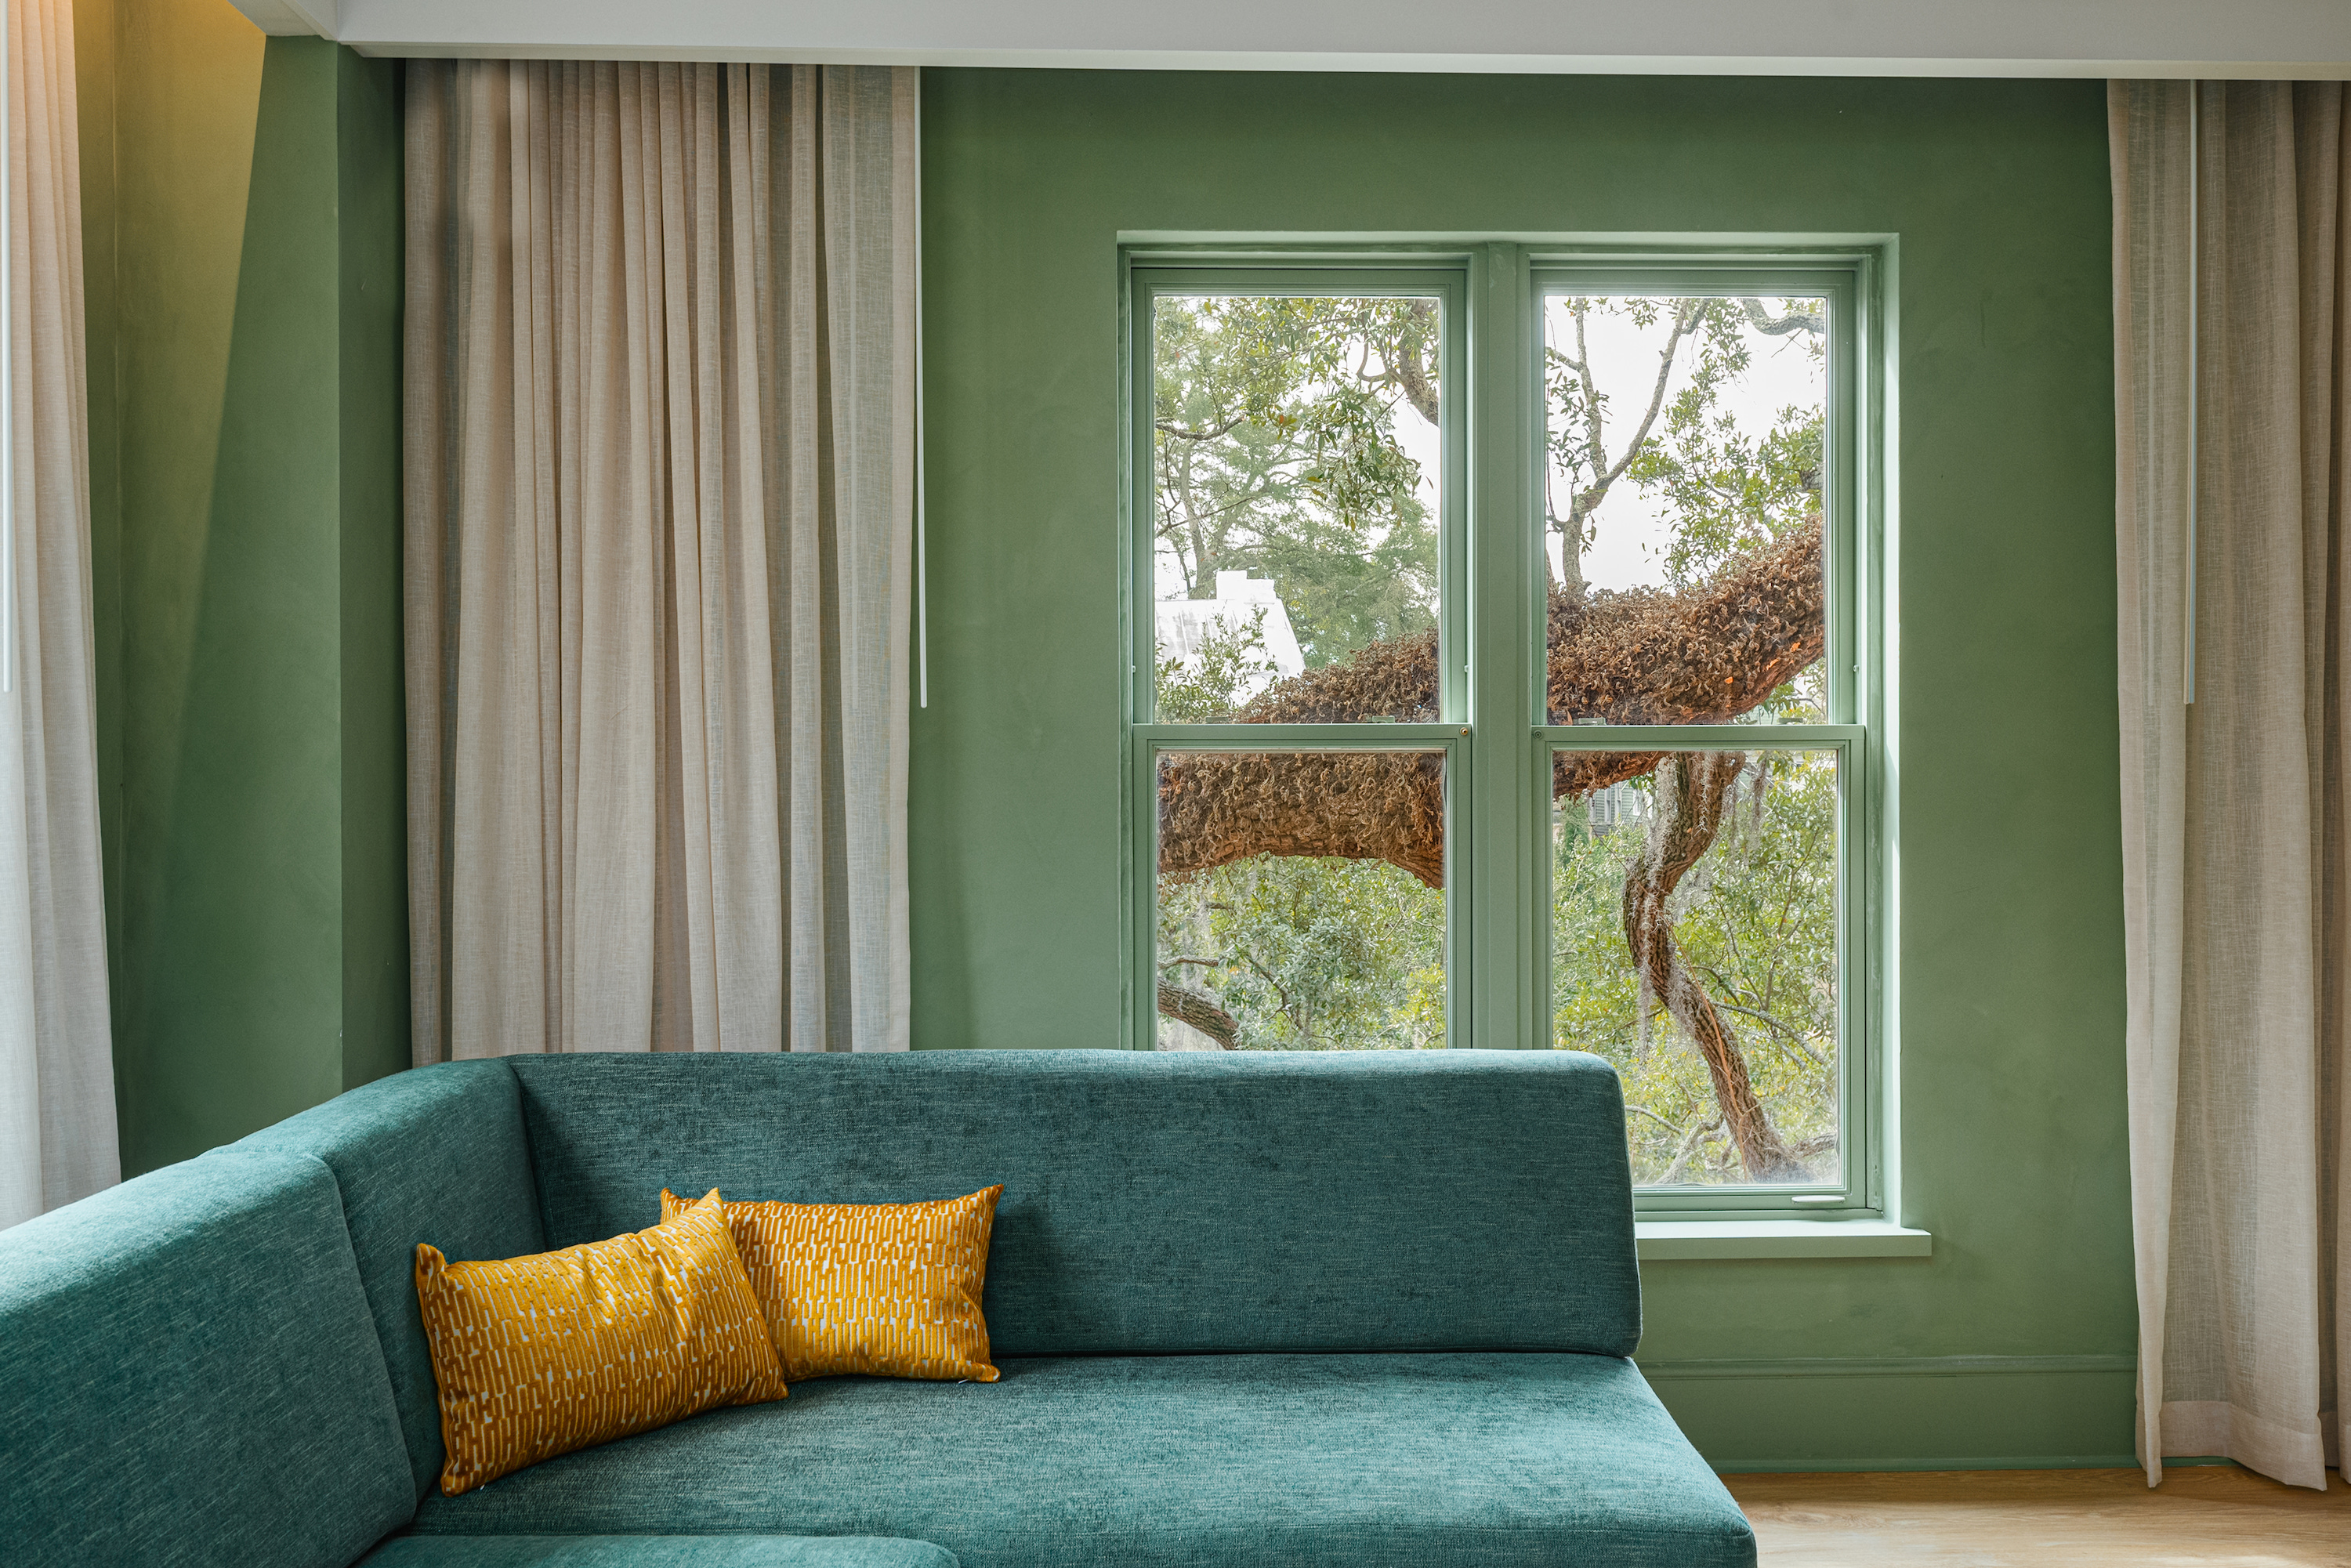 A green suite with a window looking out to branches of an oak tree;